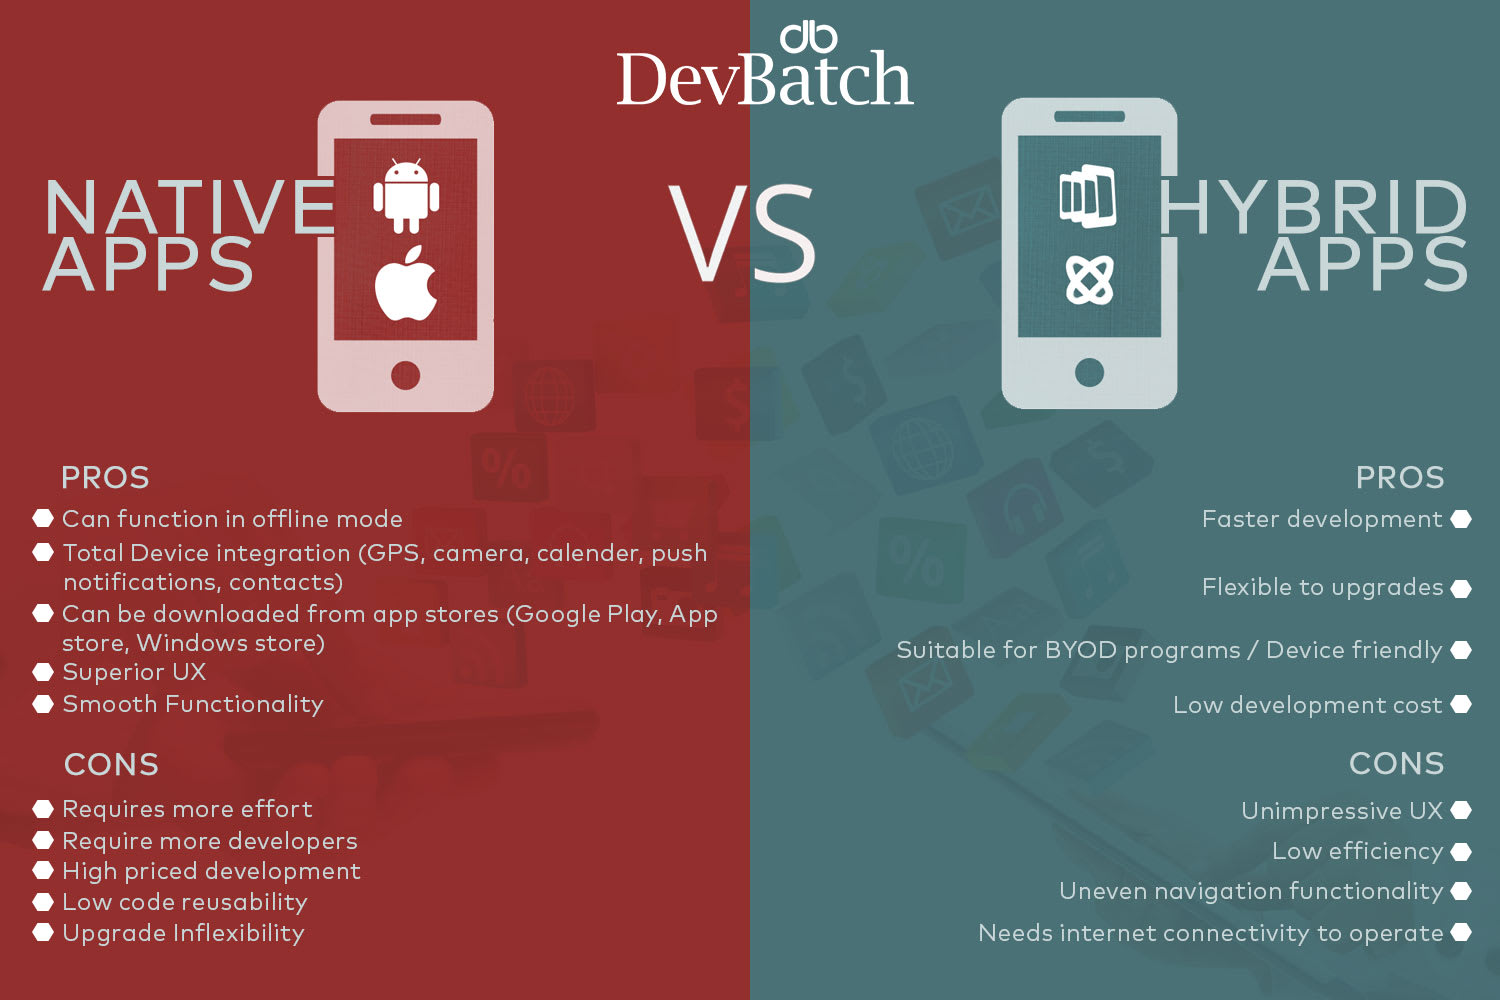 Hybrid App Development: What it is & why should you consider it?